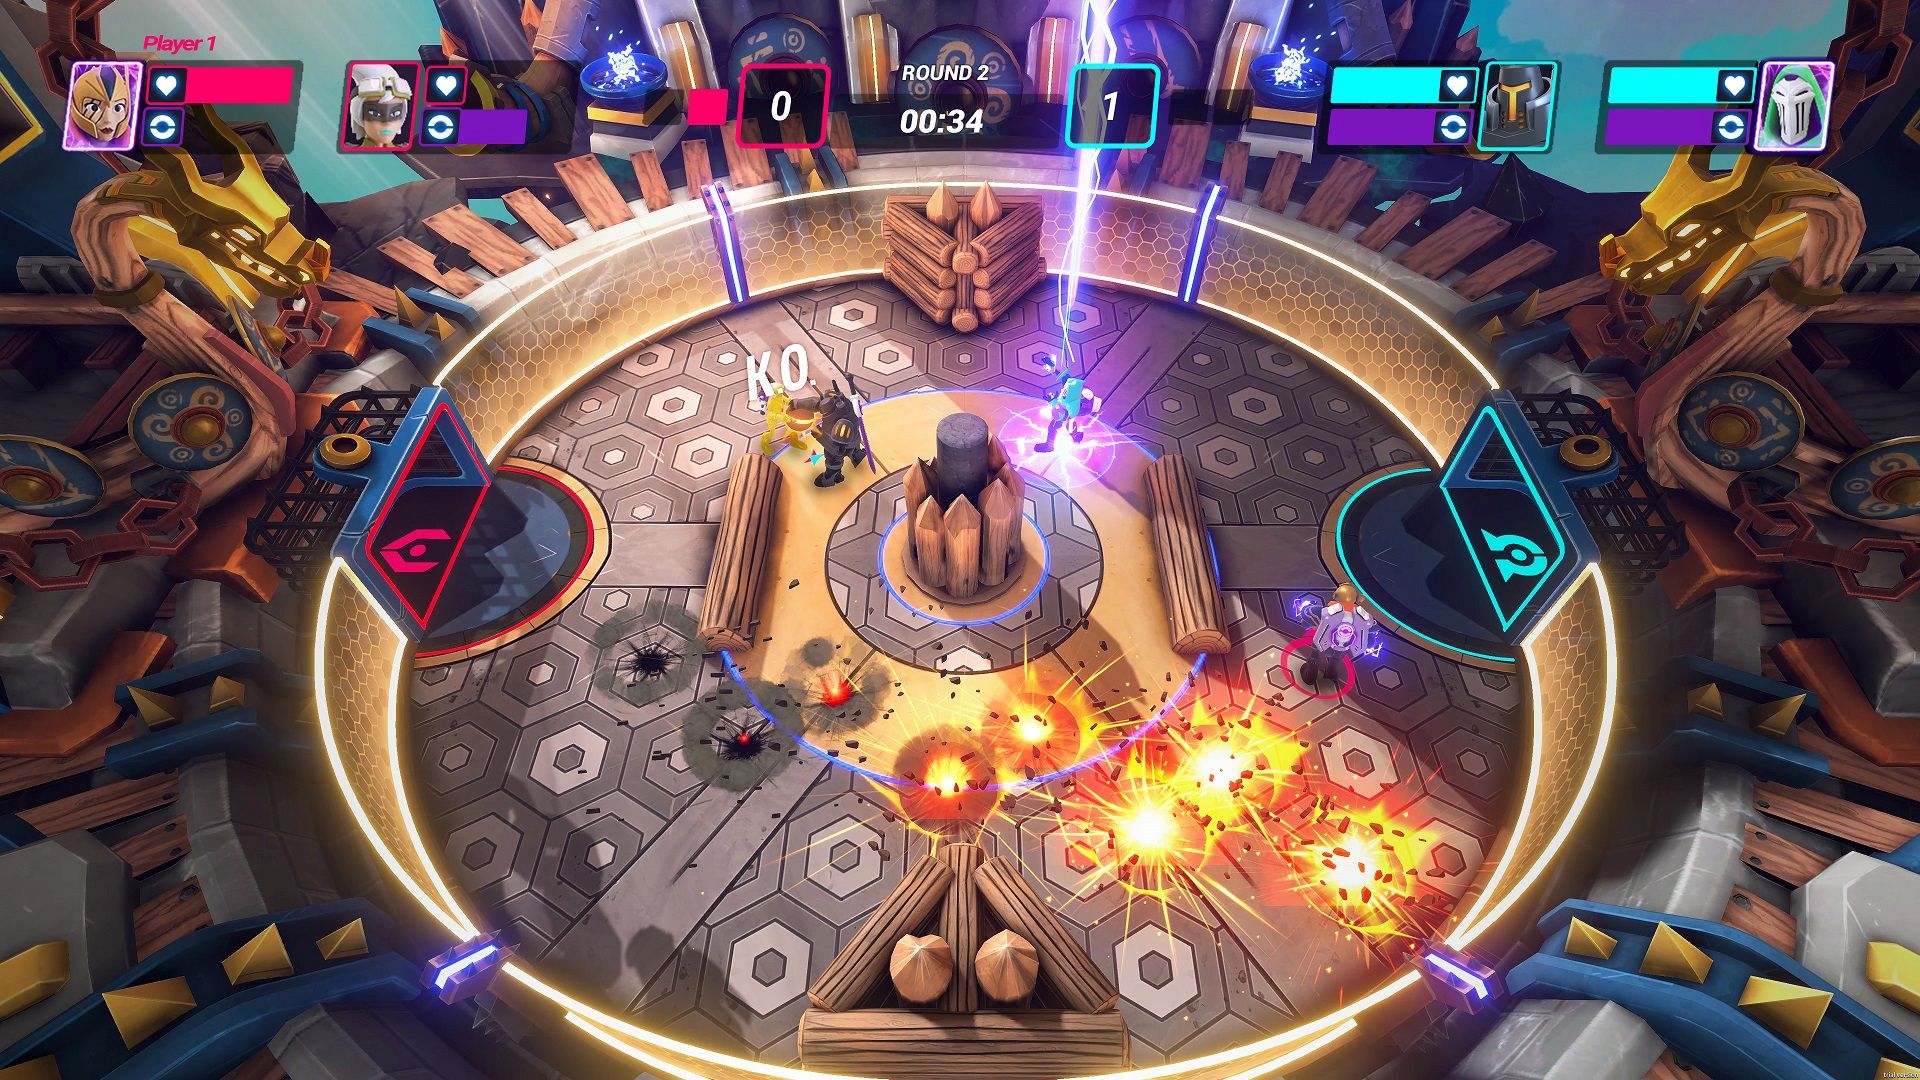 HyperBrawl Tournament download the last version for apple